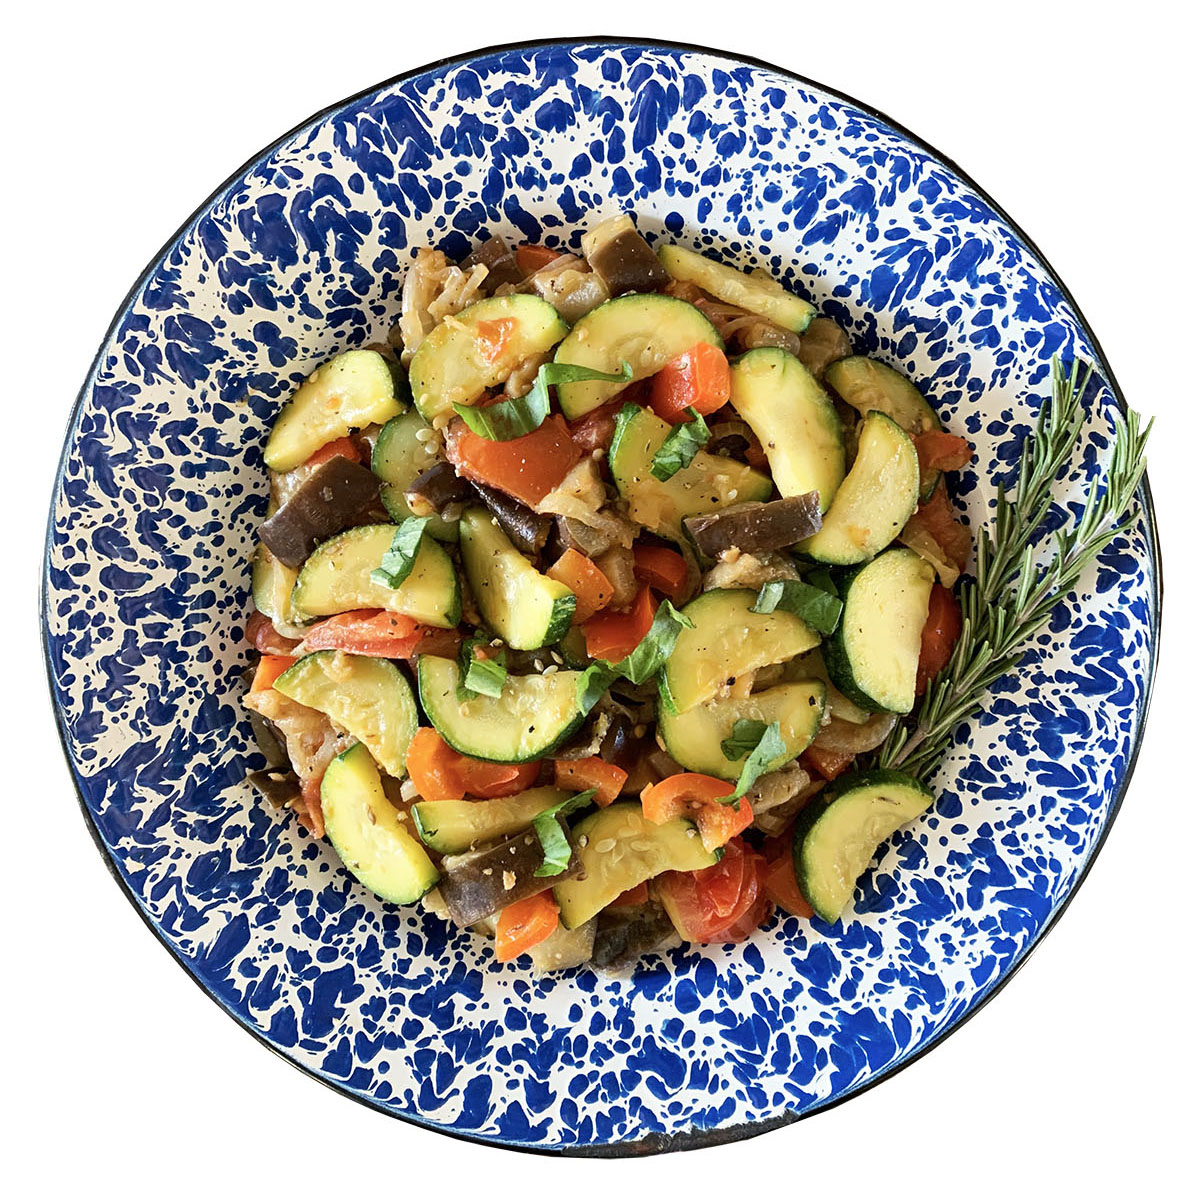 An overhead view of a blue and white plate of multi-colored and vegetable-heavy ratatouille